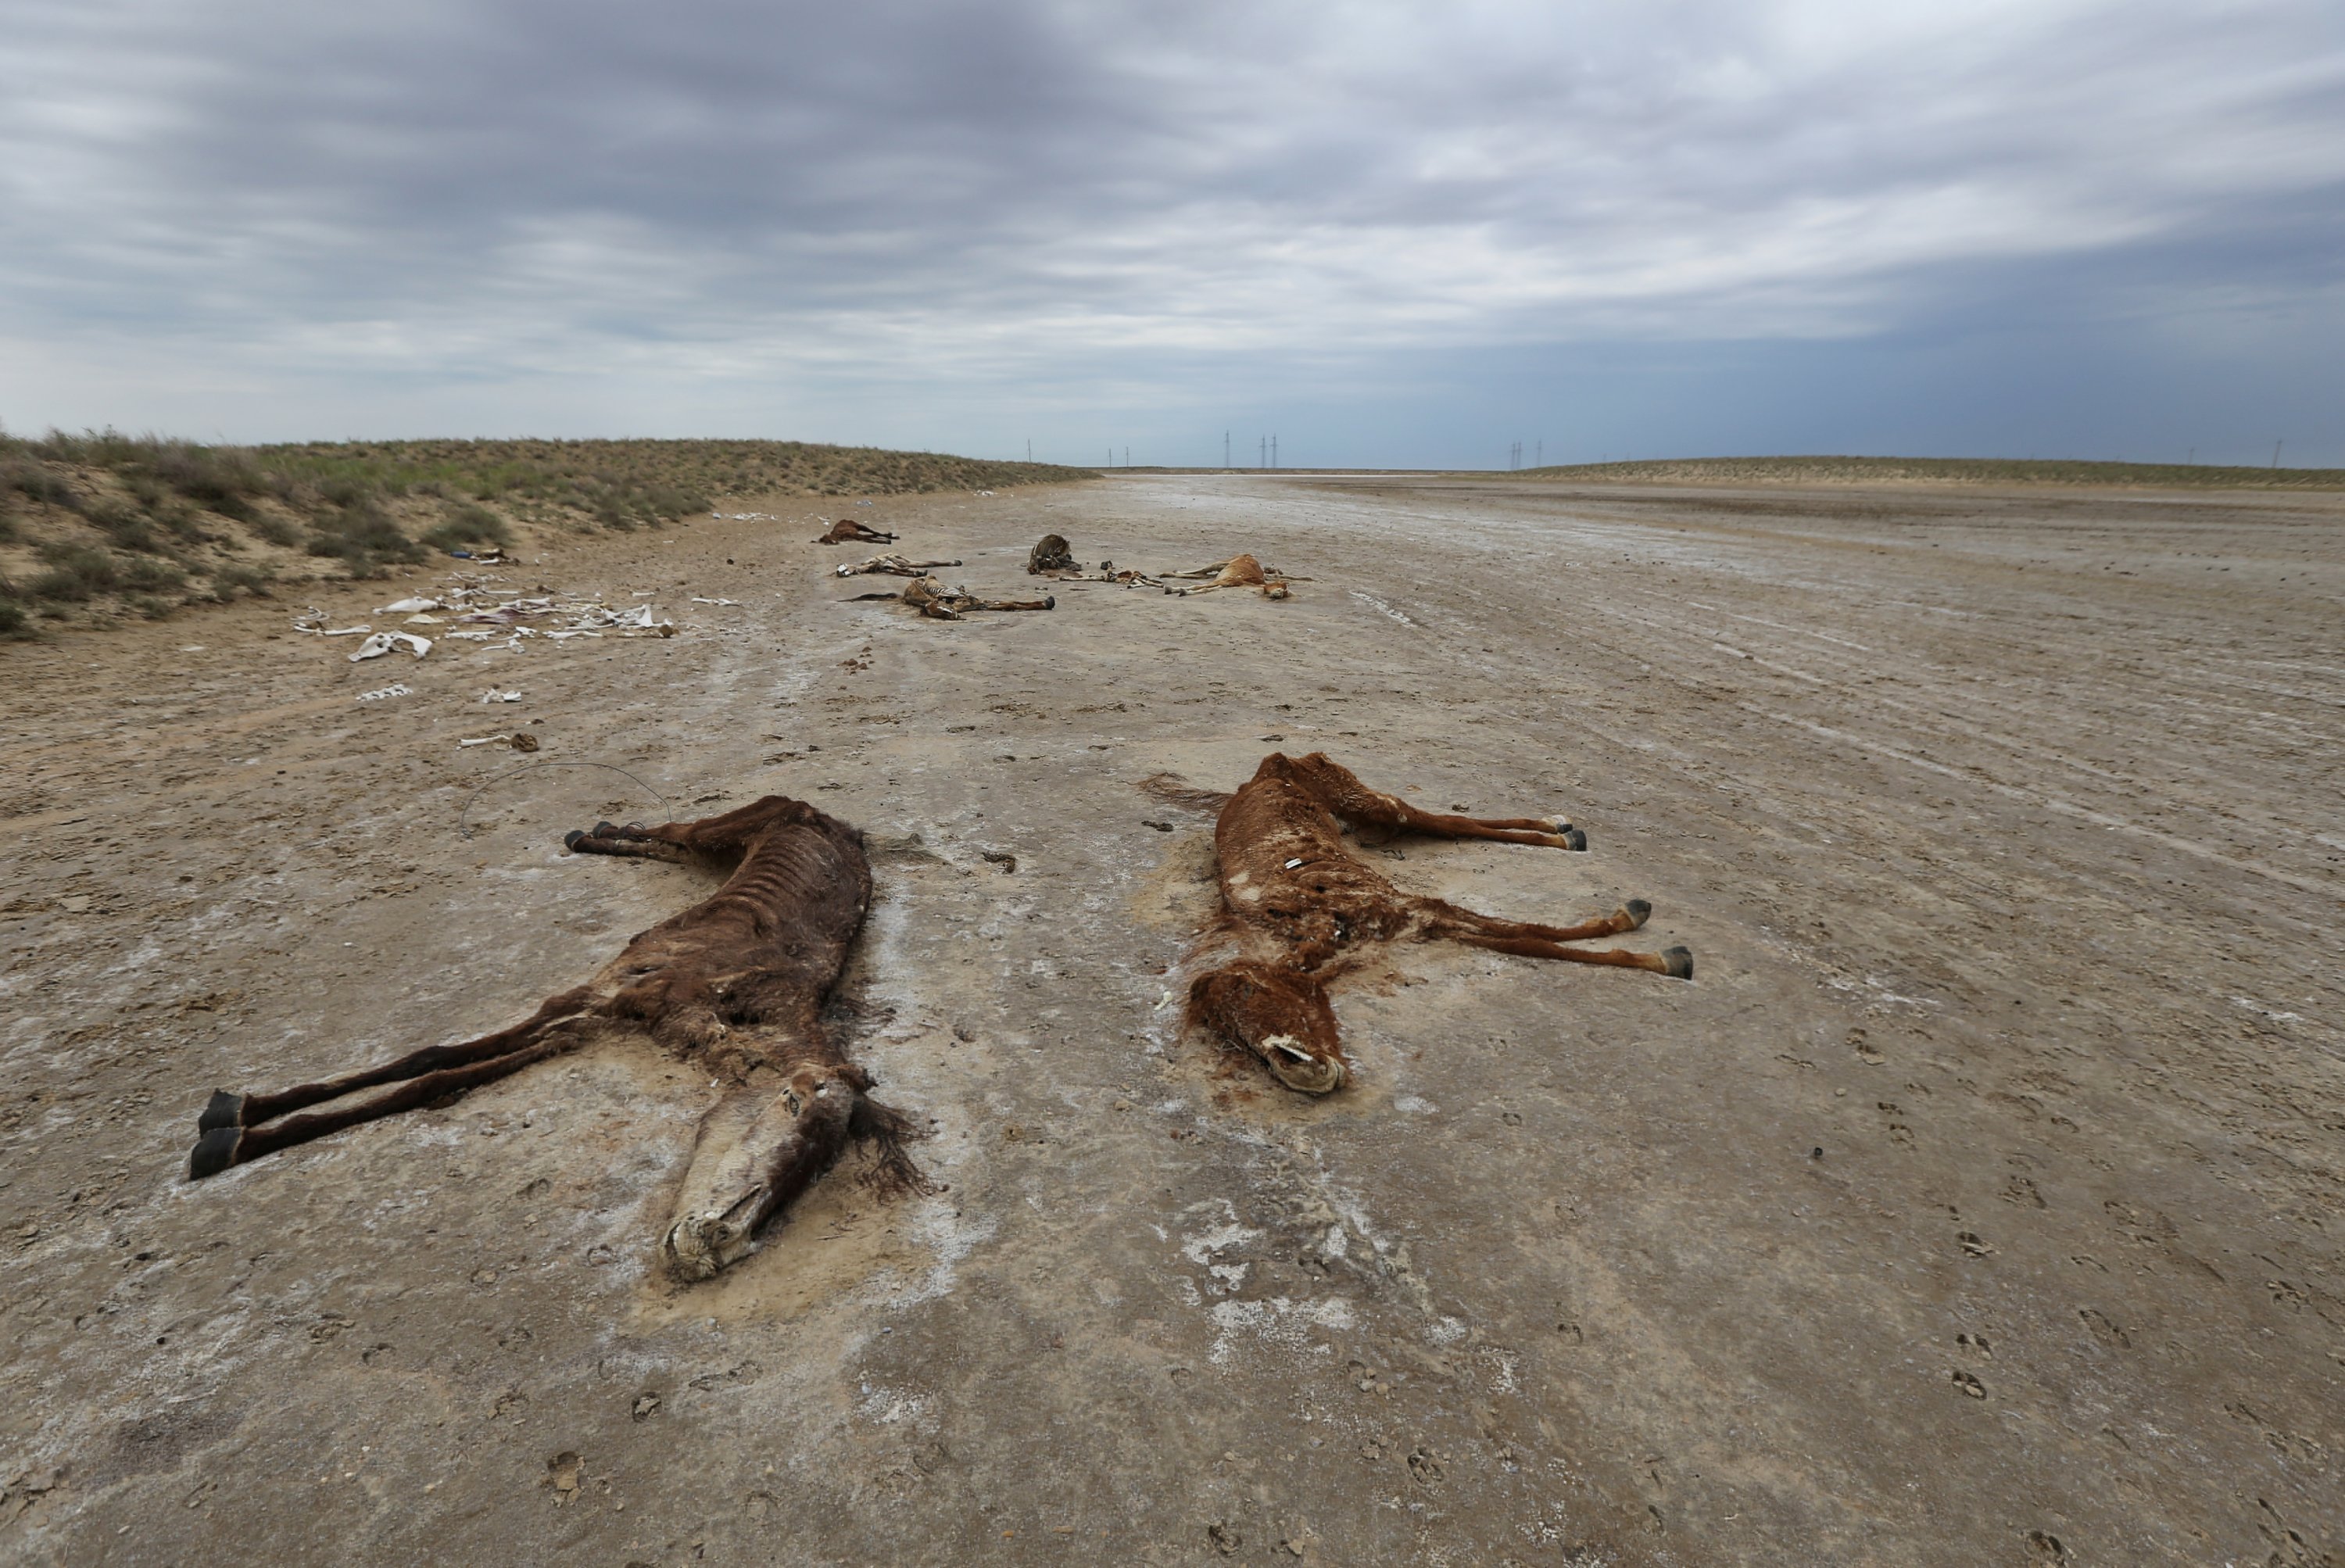 Carcasses of horses lie on the ground outside the village of Tushchykudyk amid severe drought in Mangistau Region, Kazakhstan, on July 27, 2021. (Reuters Photo)